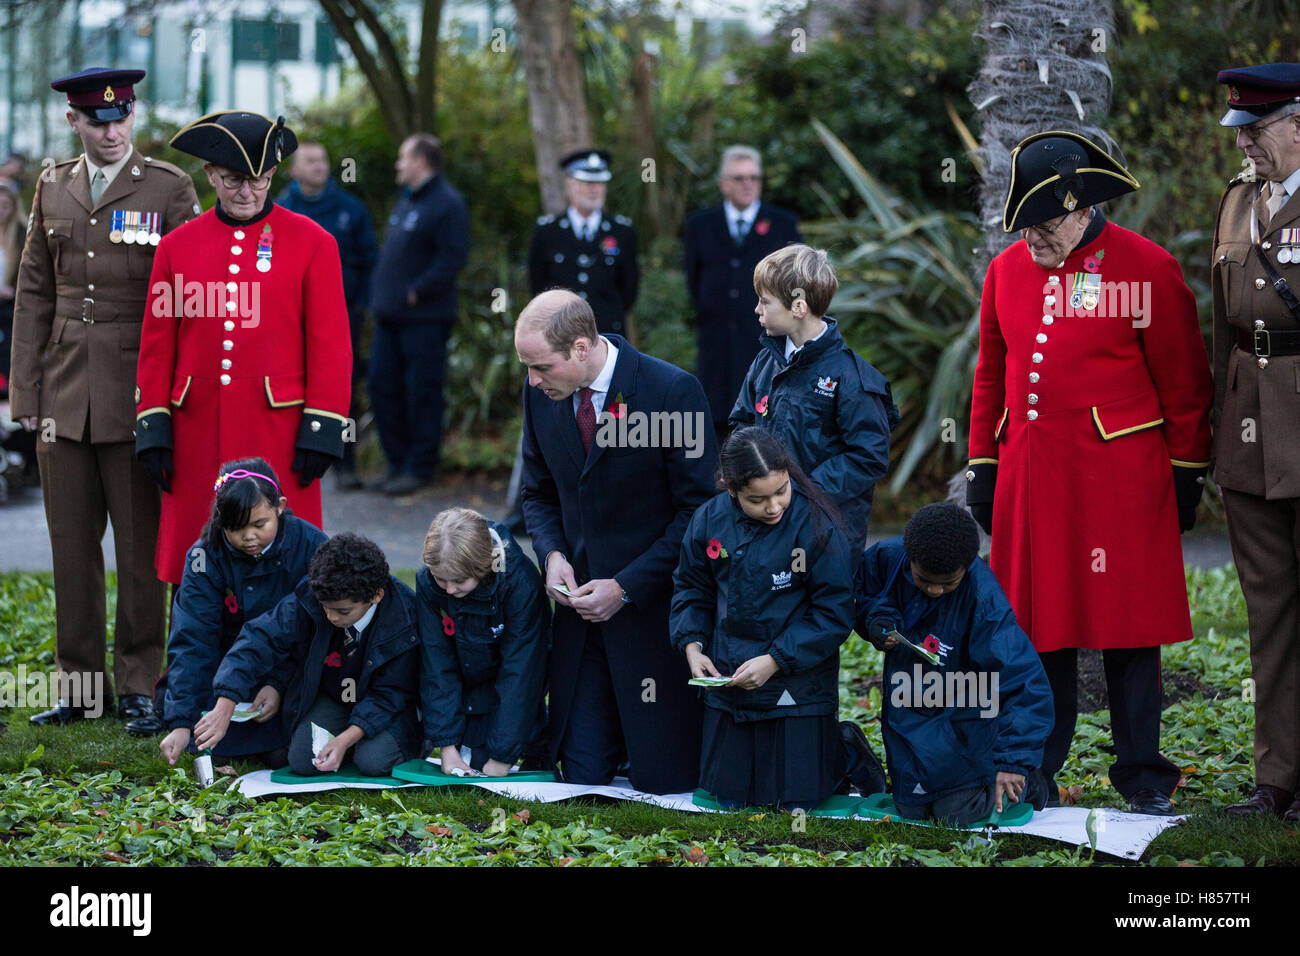 London, UK. 10th November, 2016. The Duke of Cambridge plants poppies with schoolchildren during a visit to Kensington Memorial Park as President of Fields in Trust to officially mark the dedication of the park by the Royal Borough of Kensington and Chelsea to the Centenary Fields programme. Centenary Fields honours the memory of the millions who lost their lives during the First World War by securing and protecting outdoor recreational space in perpetuity for the benefit of future generations. Stock Photo